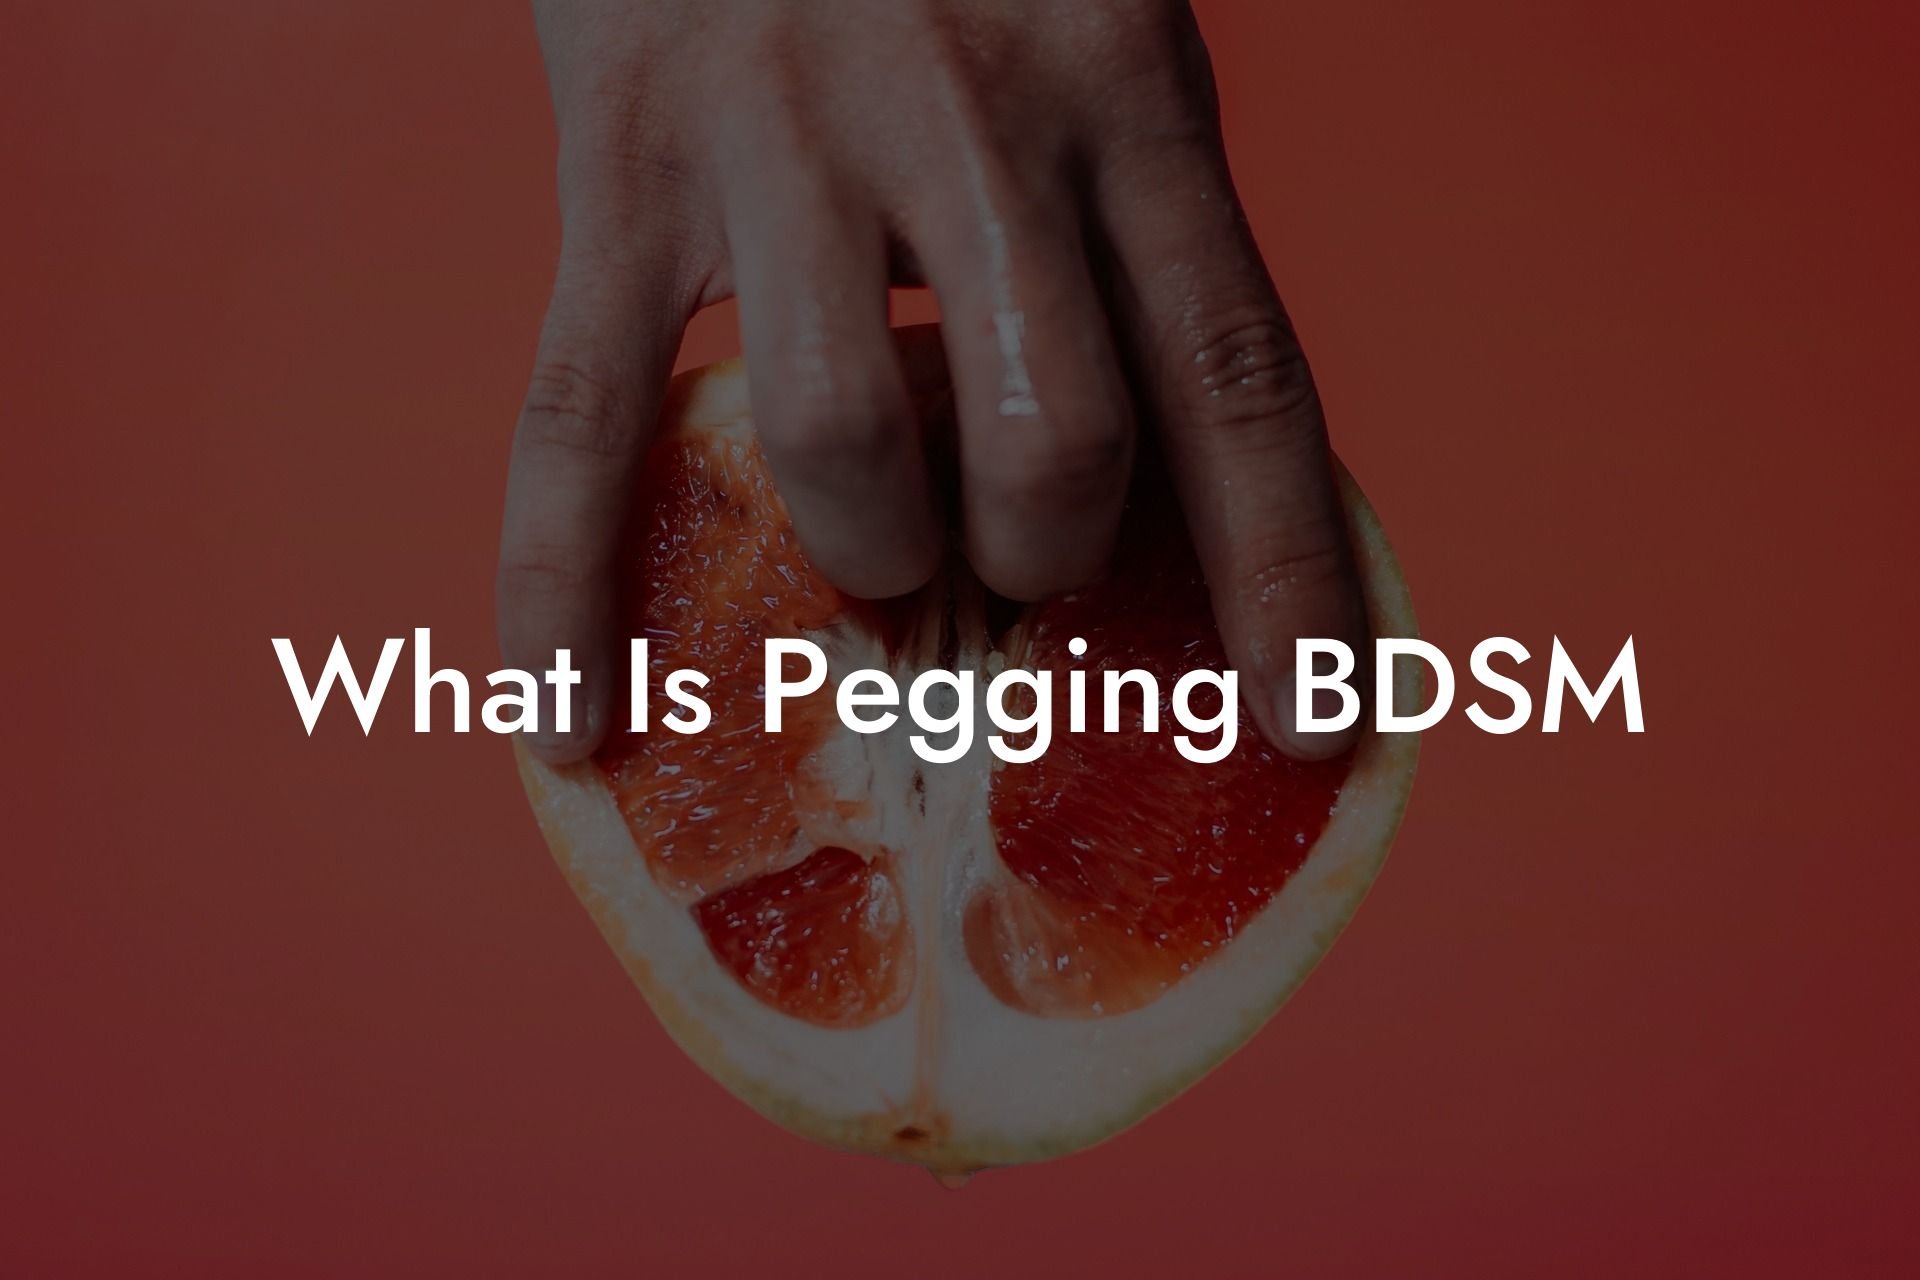 What Is Pegging BDSM